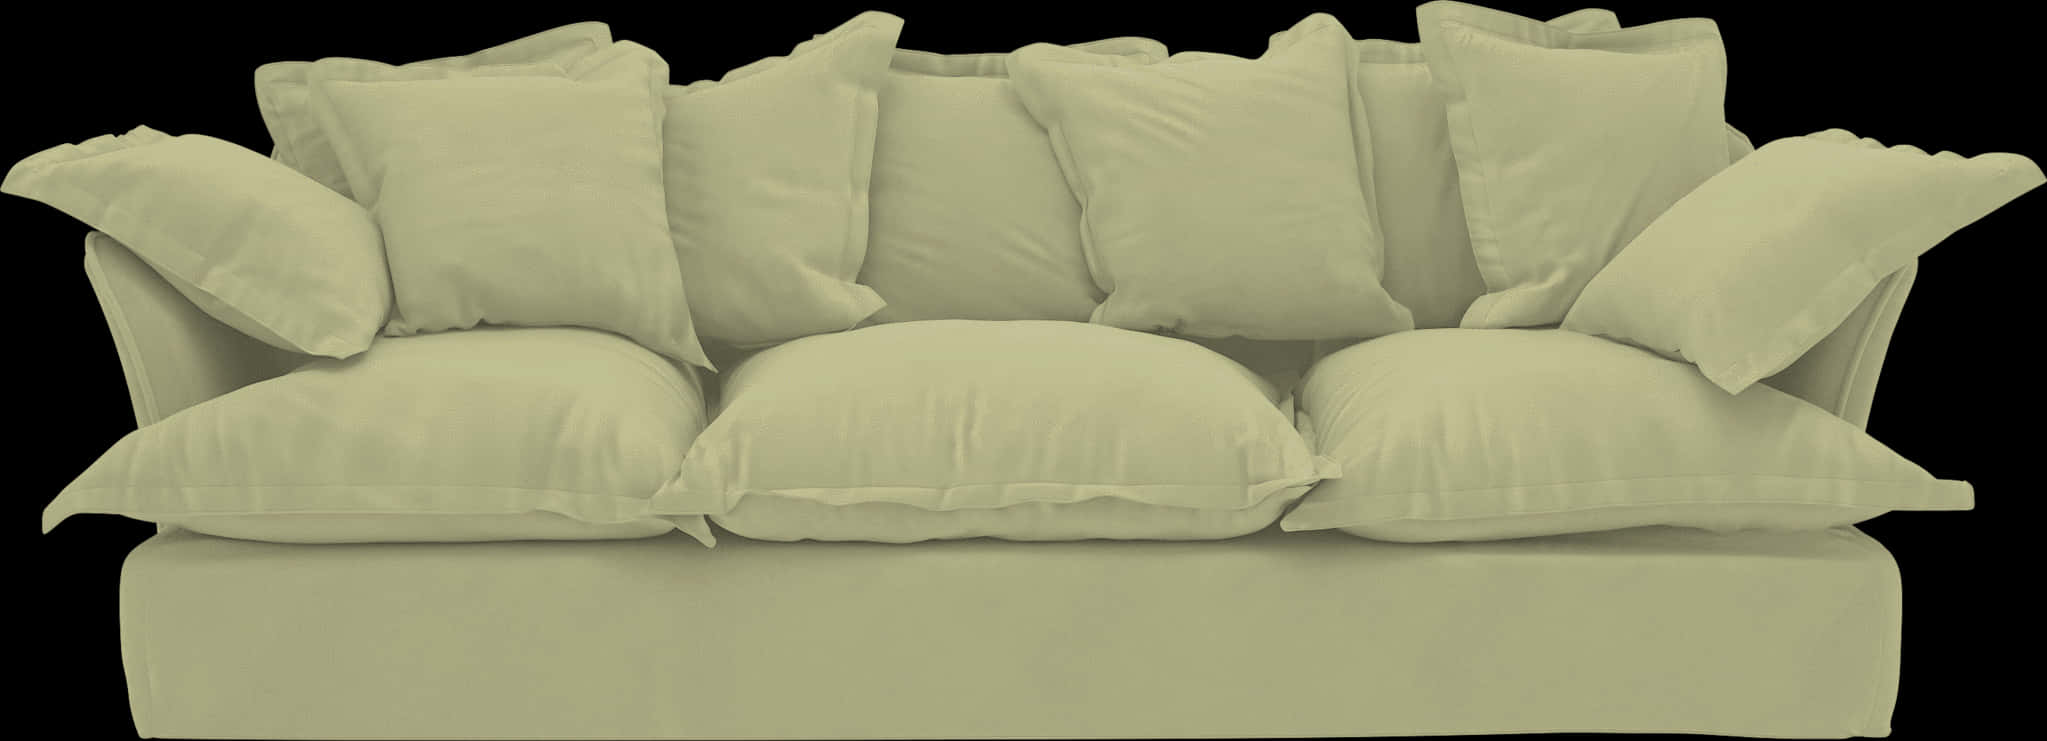 A Couch With Pillows On It